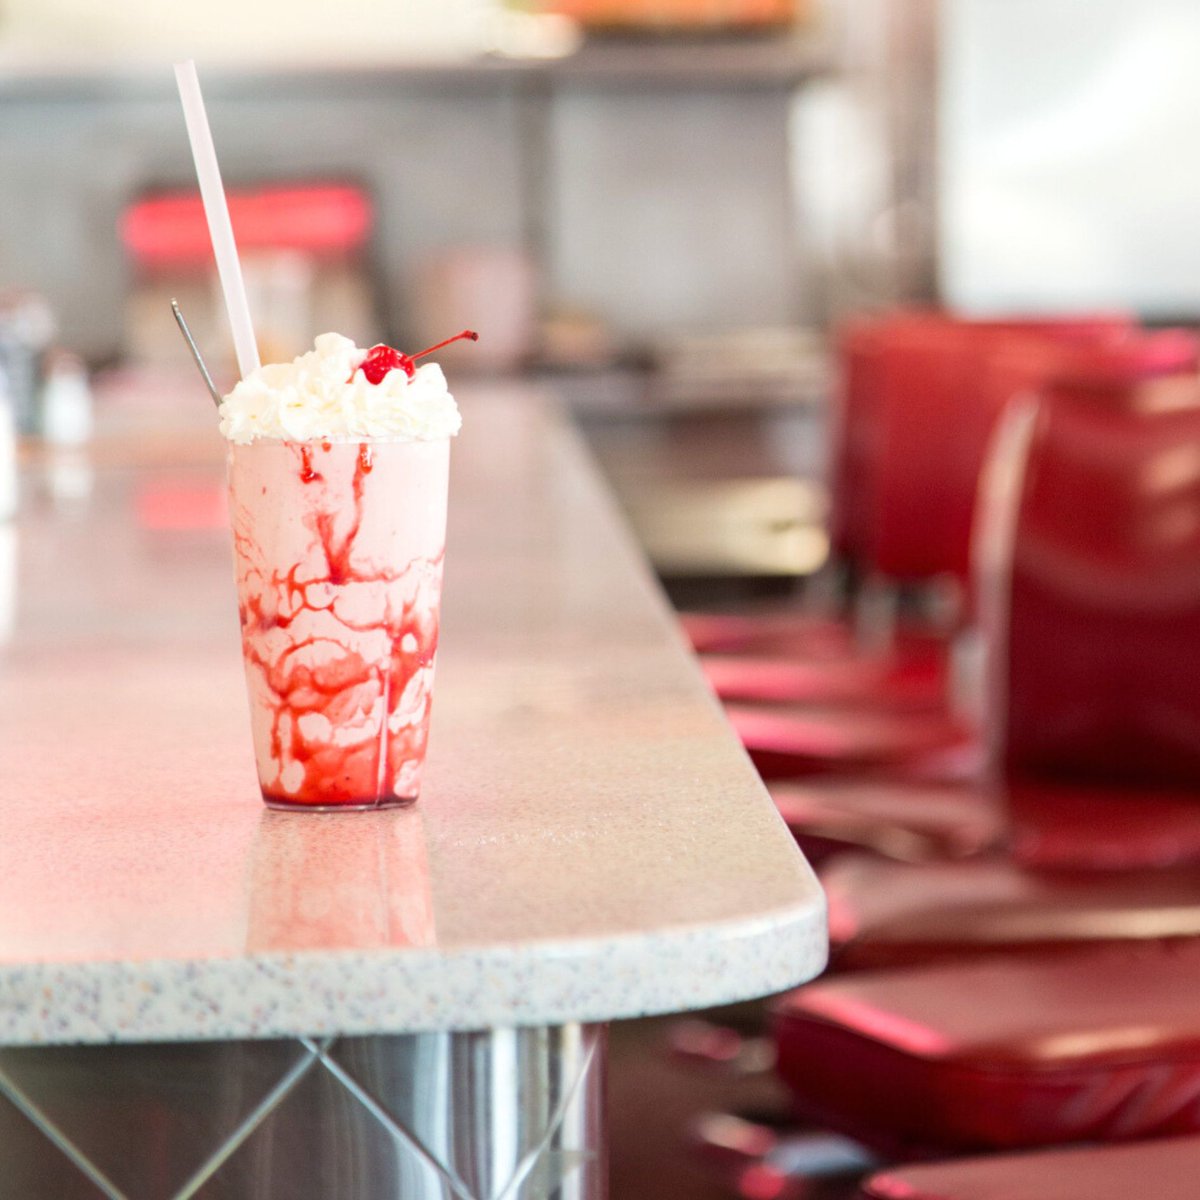 Take a trip down nostalgia lane when visiting Tally's Cafe in Tulsa. 🥤
Fast, friendly service, delicious food and picture-worthy decor make Tally's a Route 66 staple!

Download our FREE travel guide to find more gems on Route 66: travelok.la/Rt_66Passport